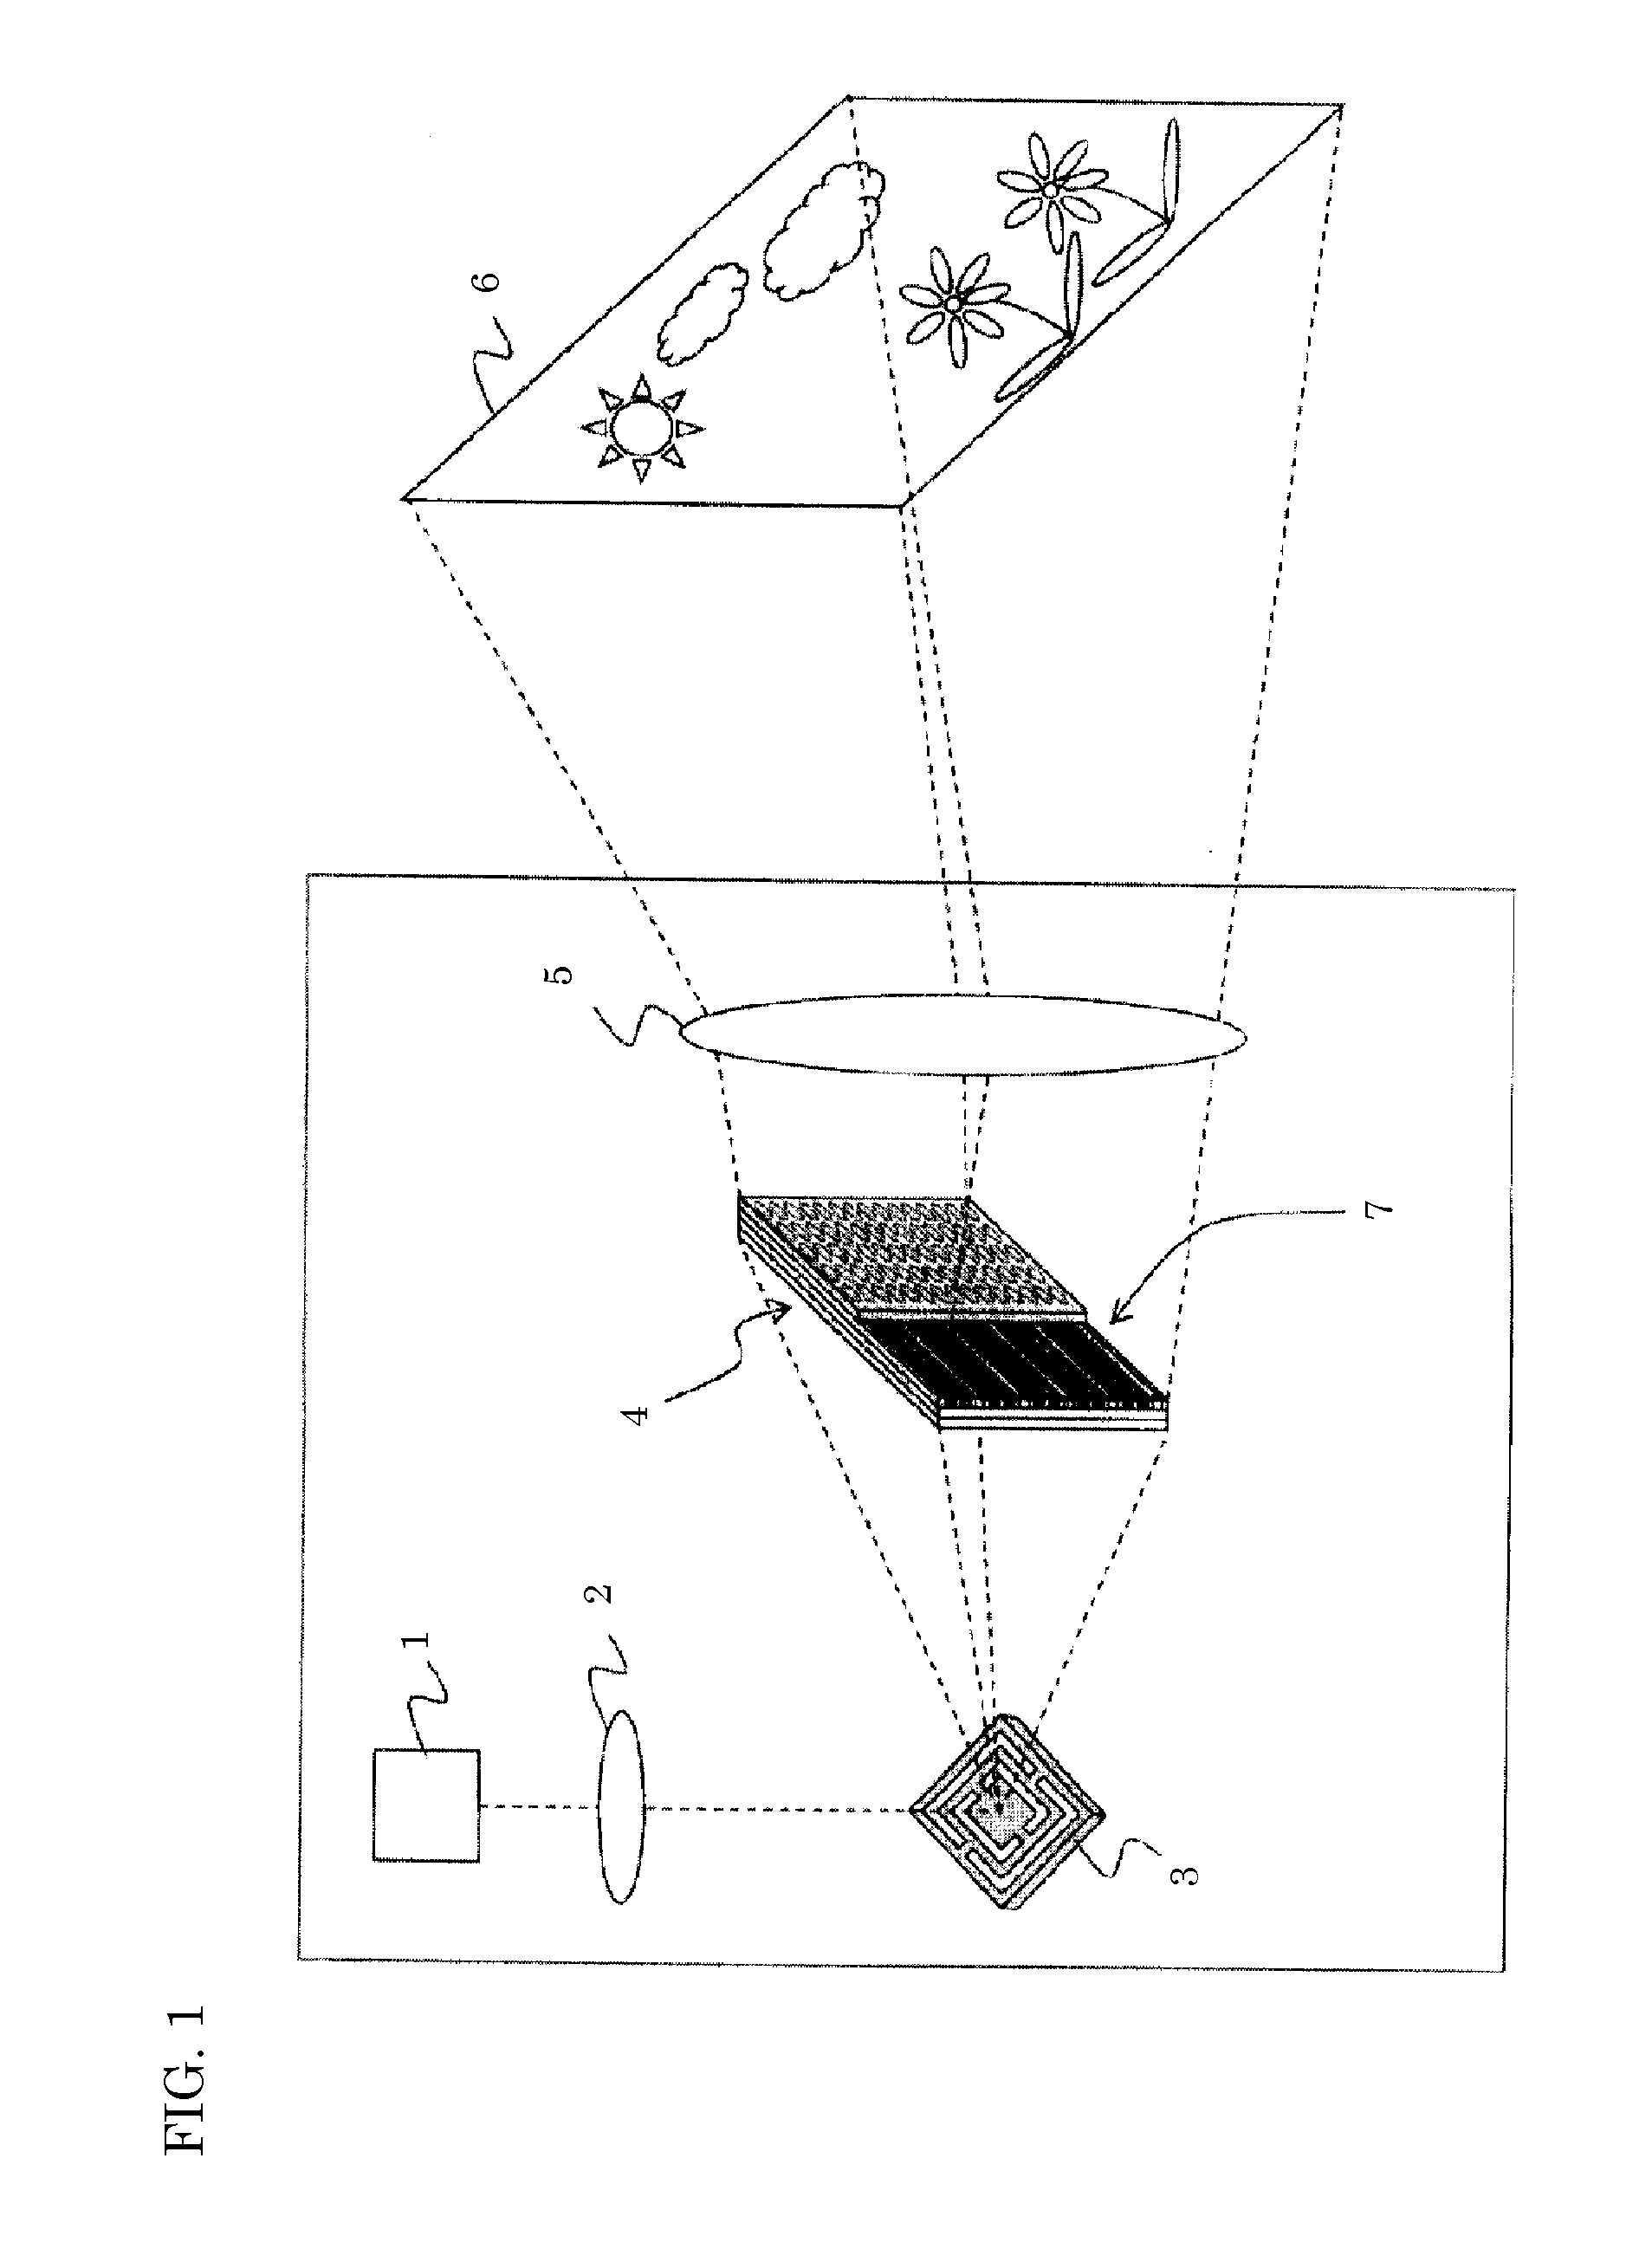 Image display device and light conversion panel used in same